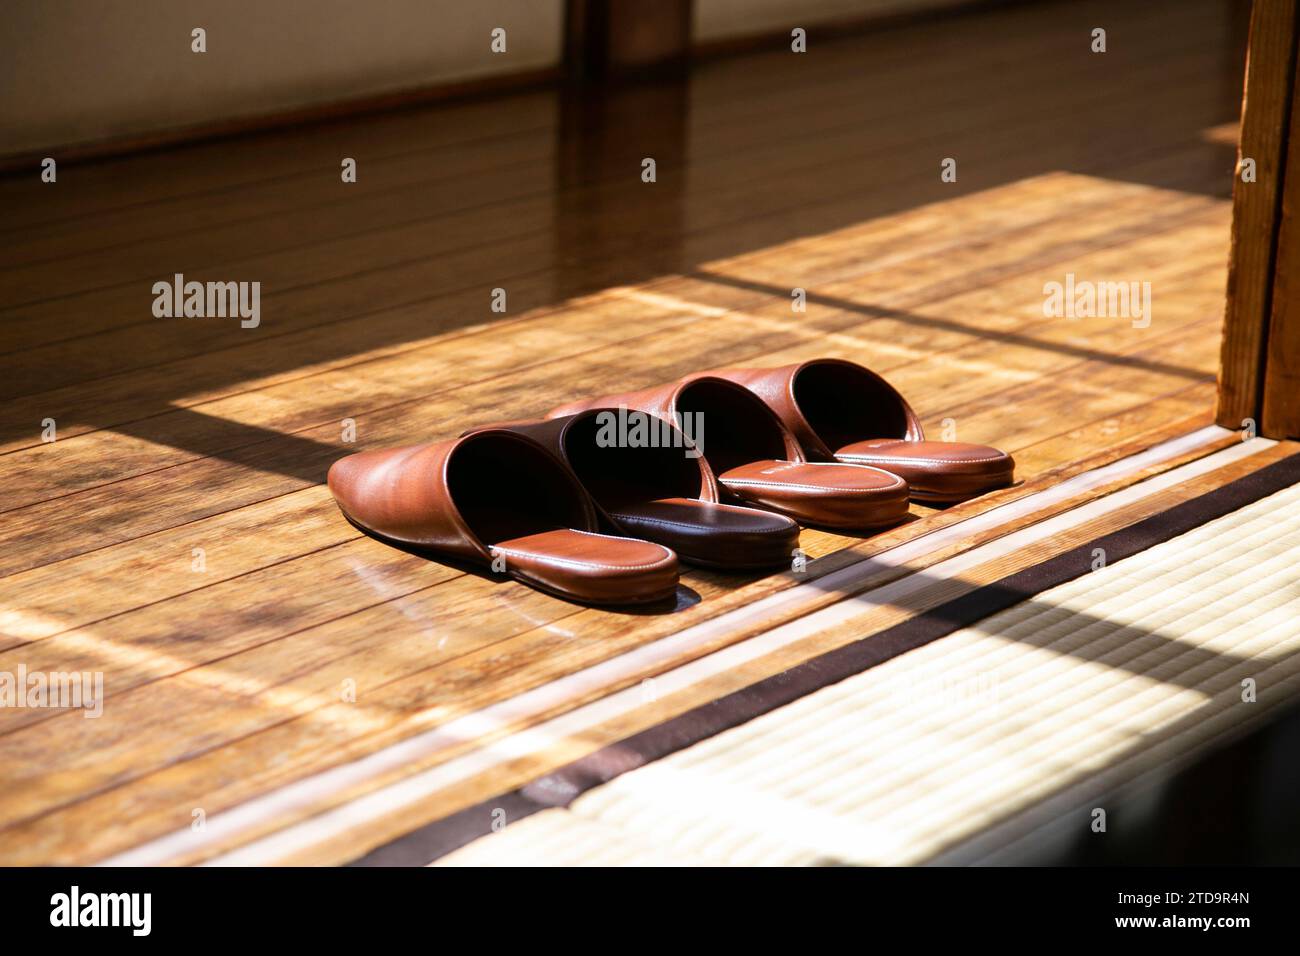 Domestic leather slippers at the entrance of a Japanese house with wooden floors. Stock Photo